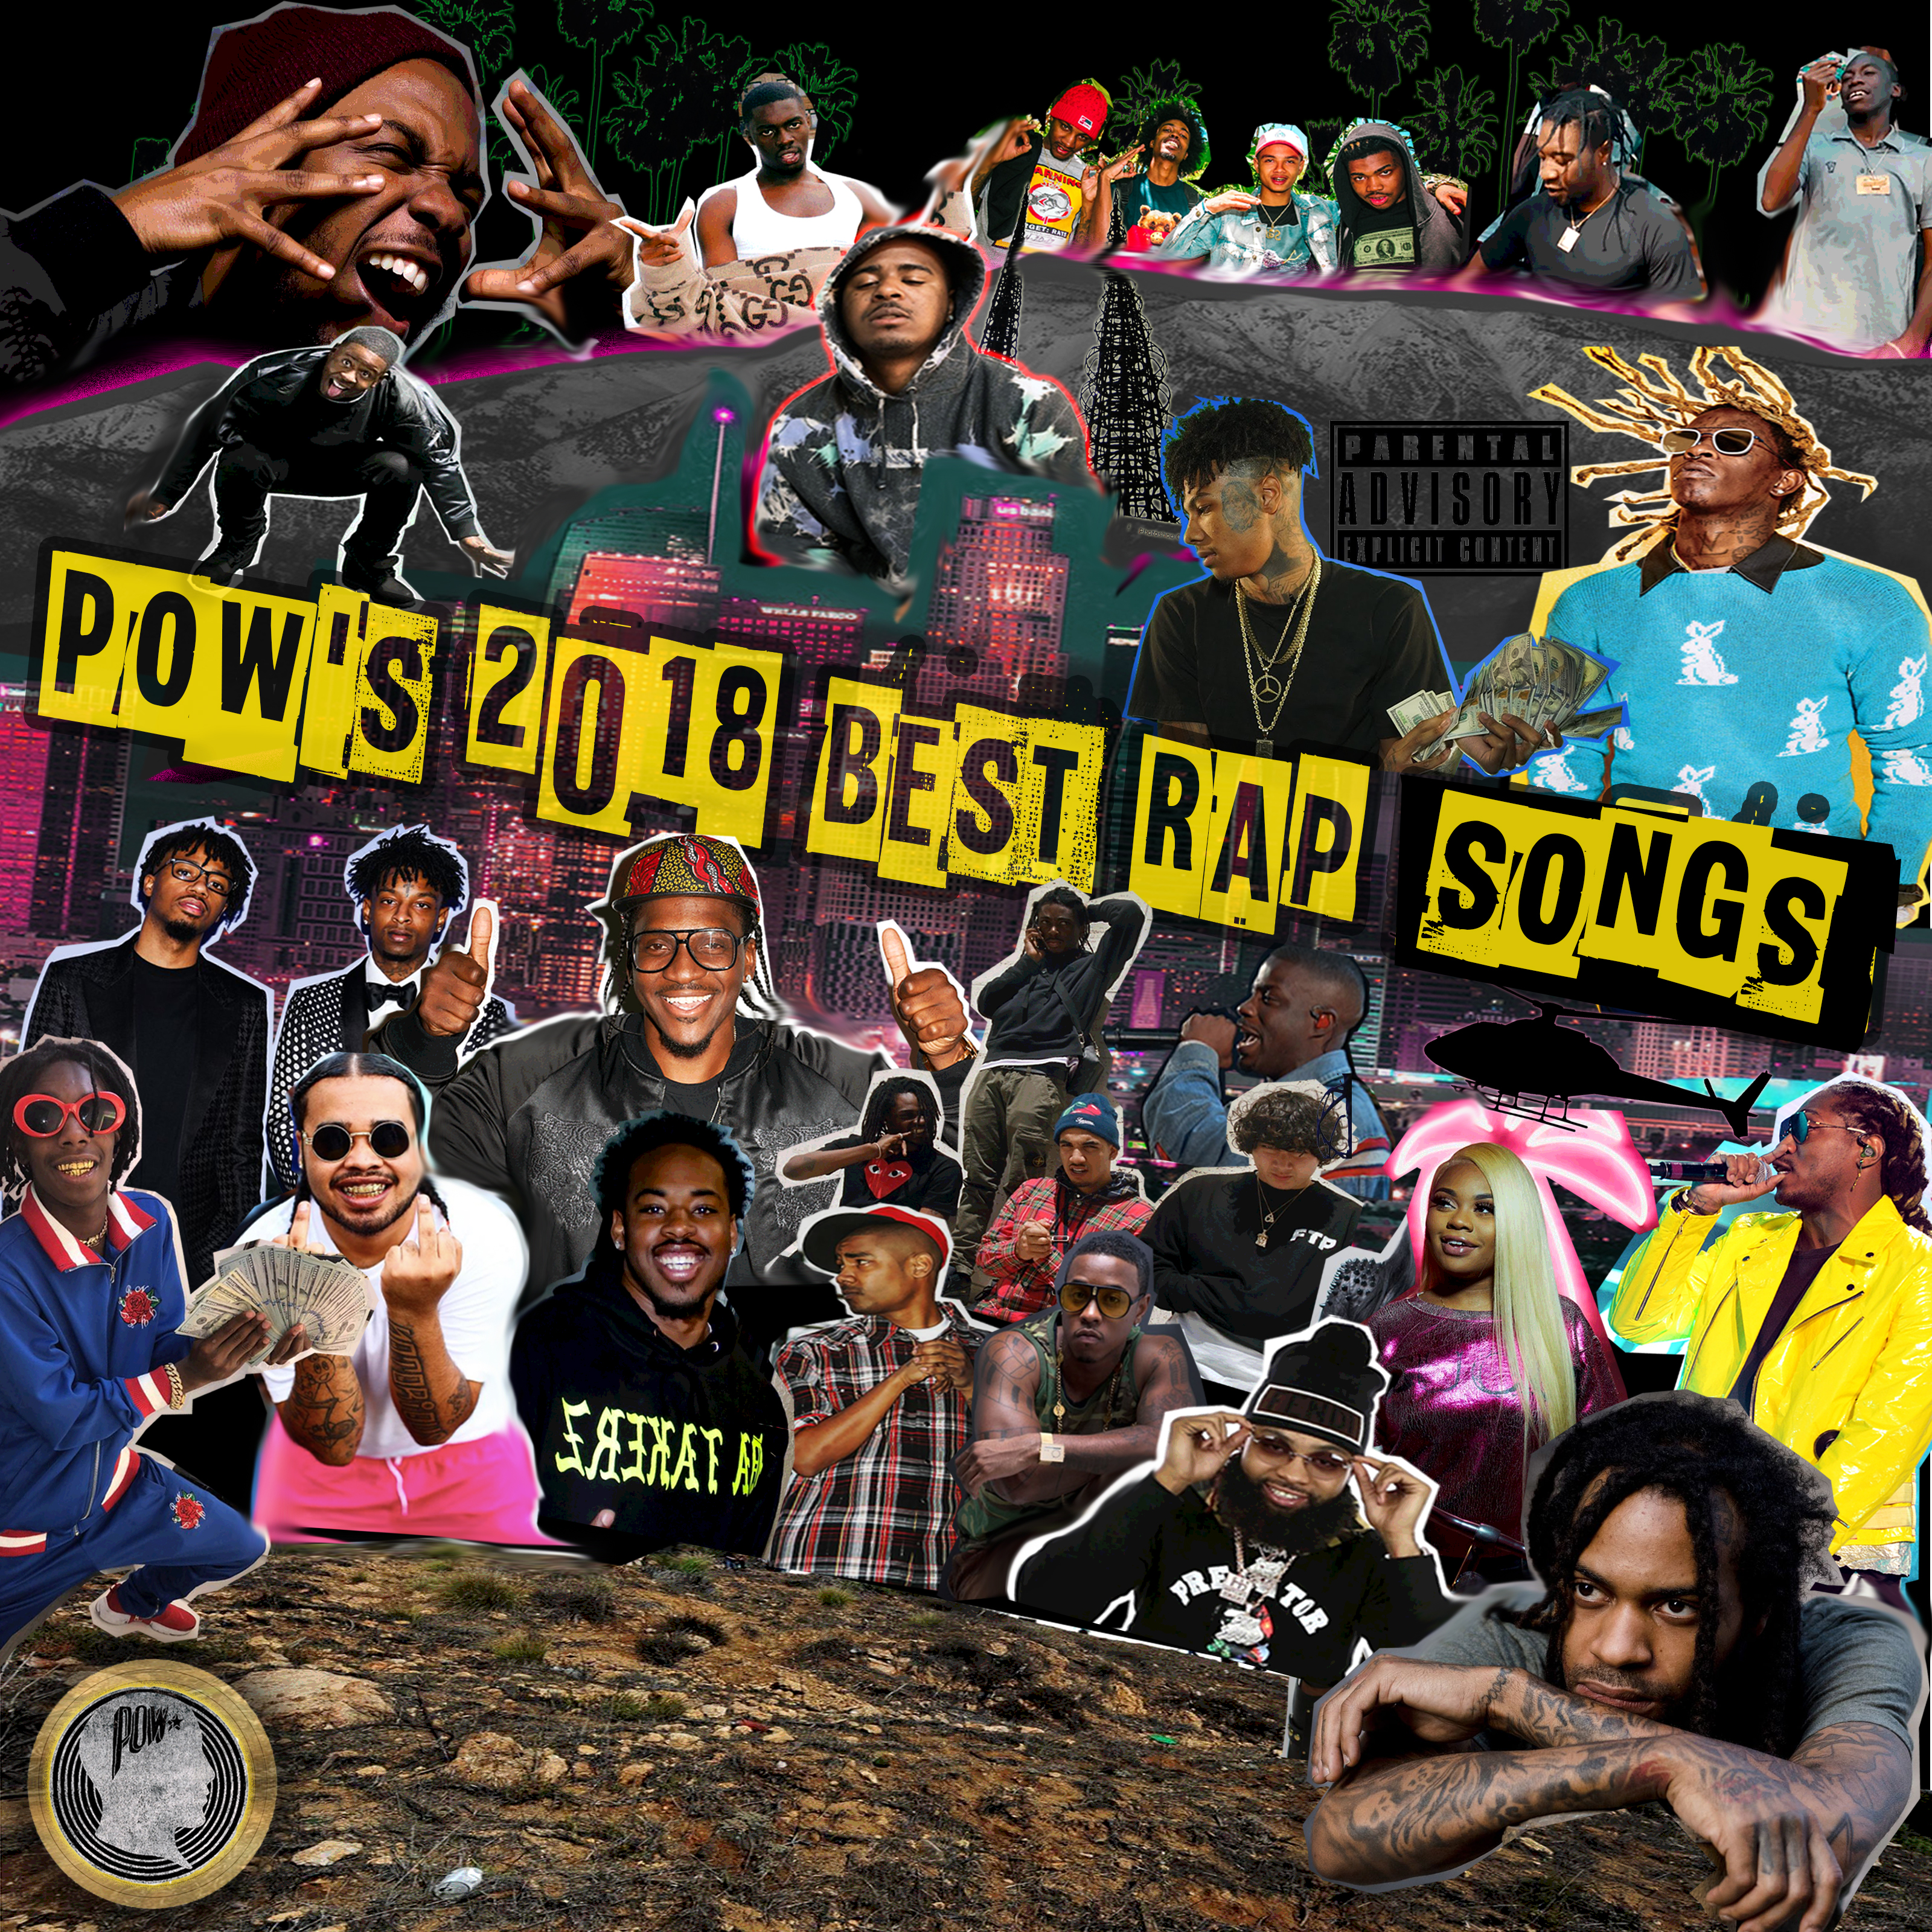 The POW Best Rap Songs of 2018 | Passion of the Weiss